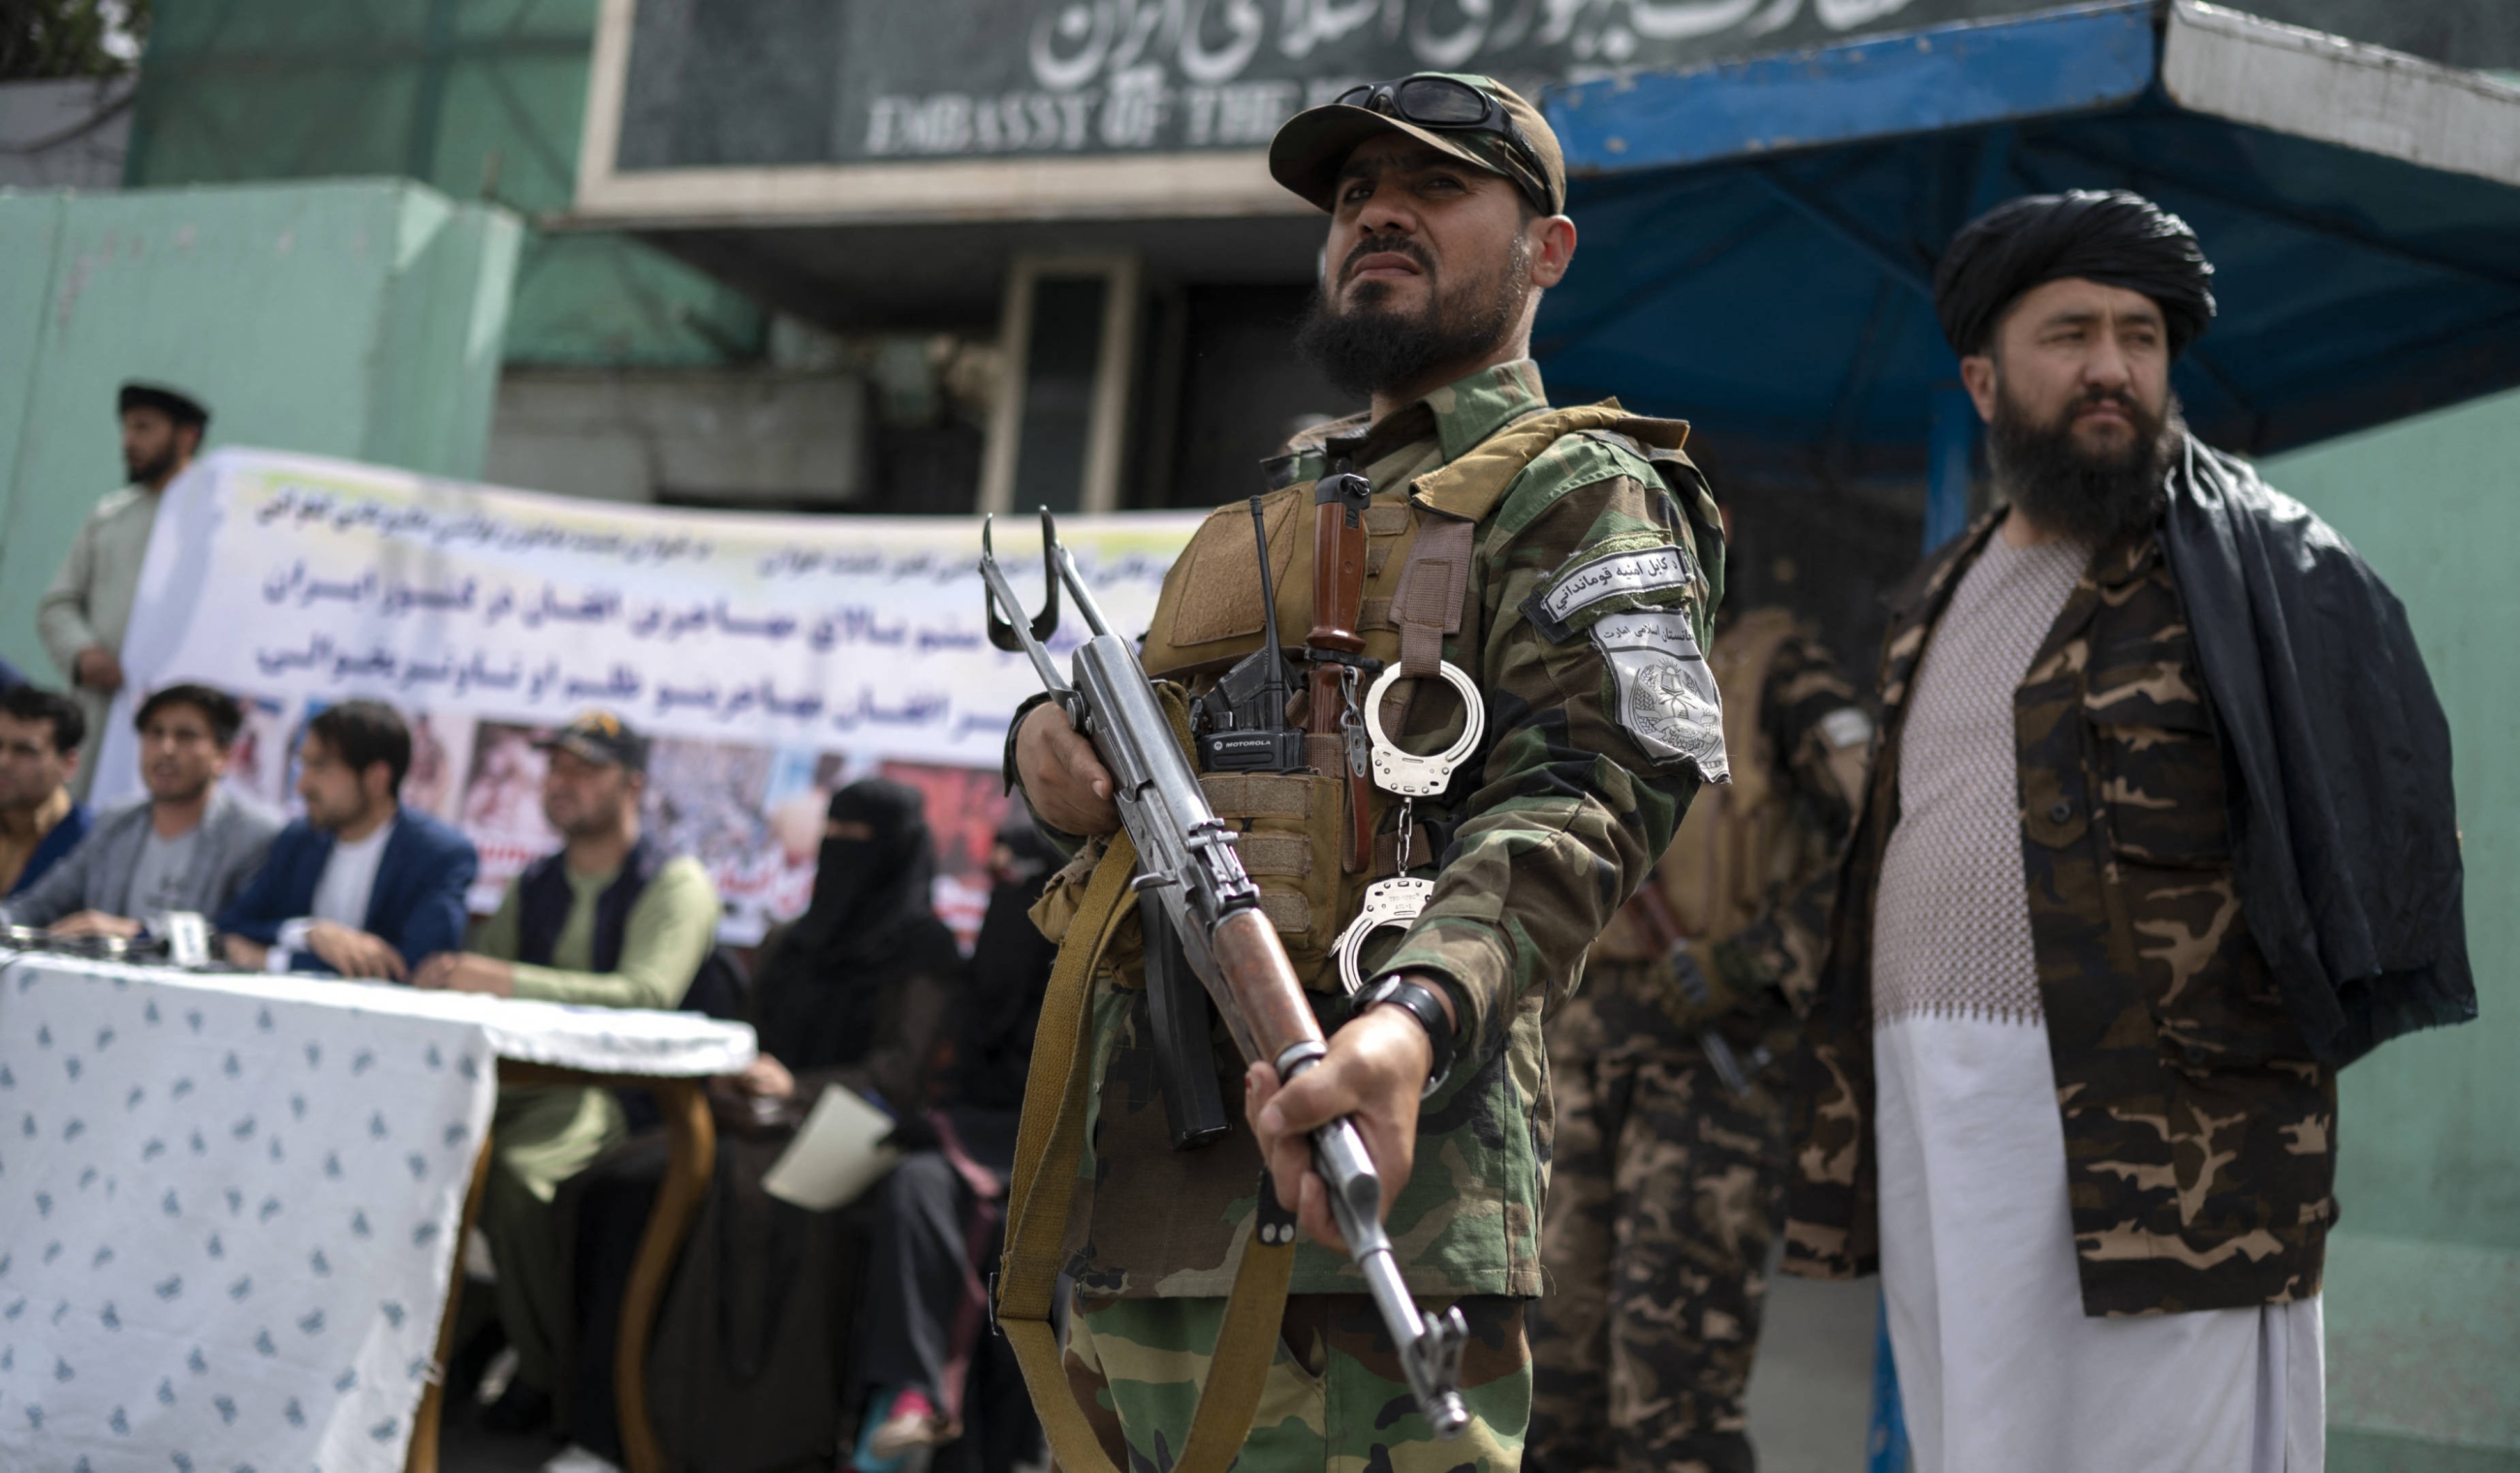 Taliban fighters stand guard as Afghan protesters take part in a demonstration against reports of harassment of Afghan refugees in Iran, in front of the Iranian embassy in Kabul on 11 April 2022